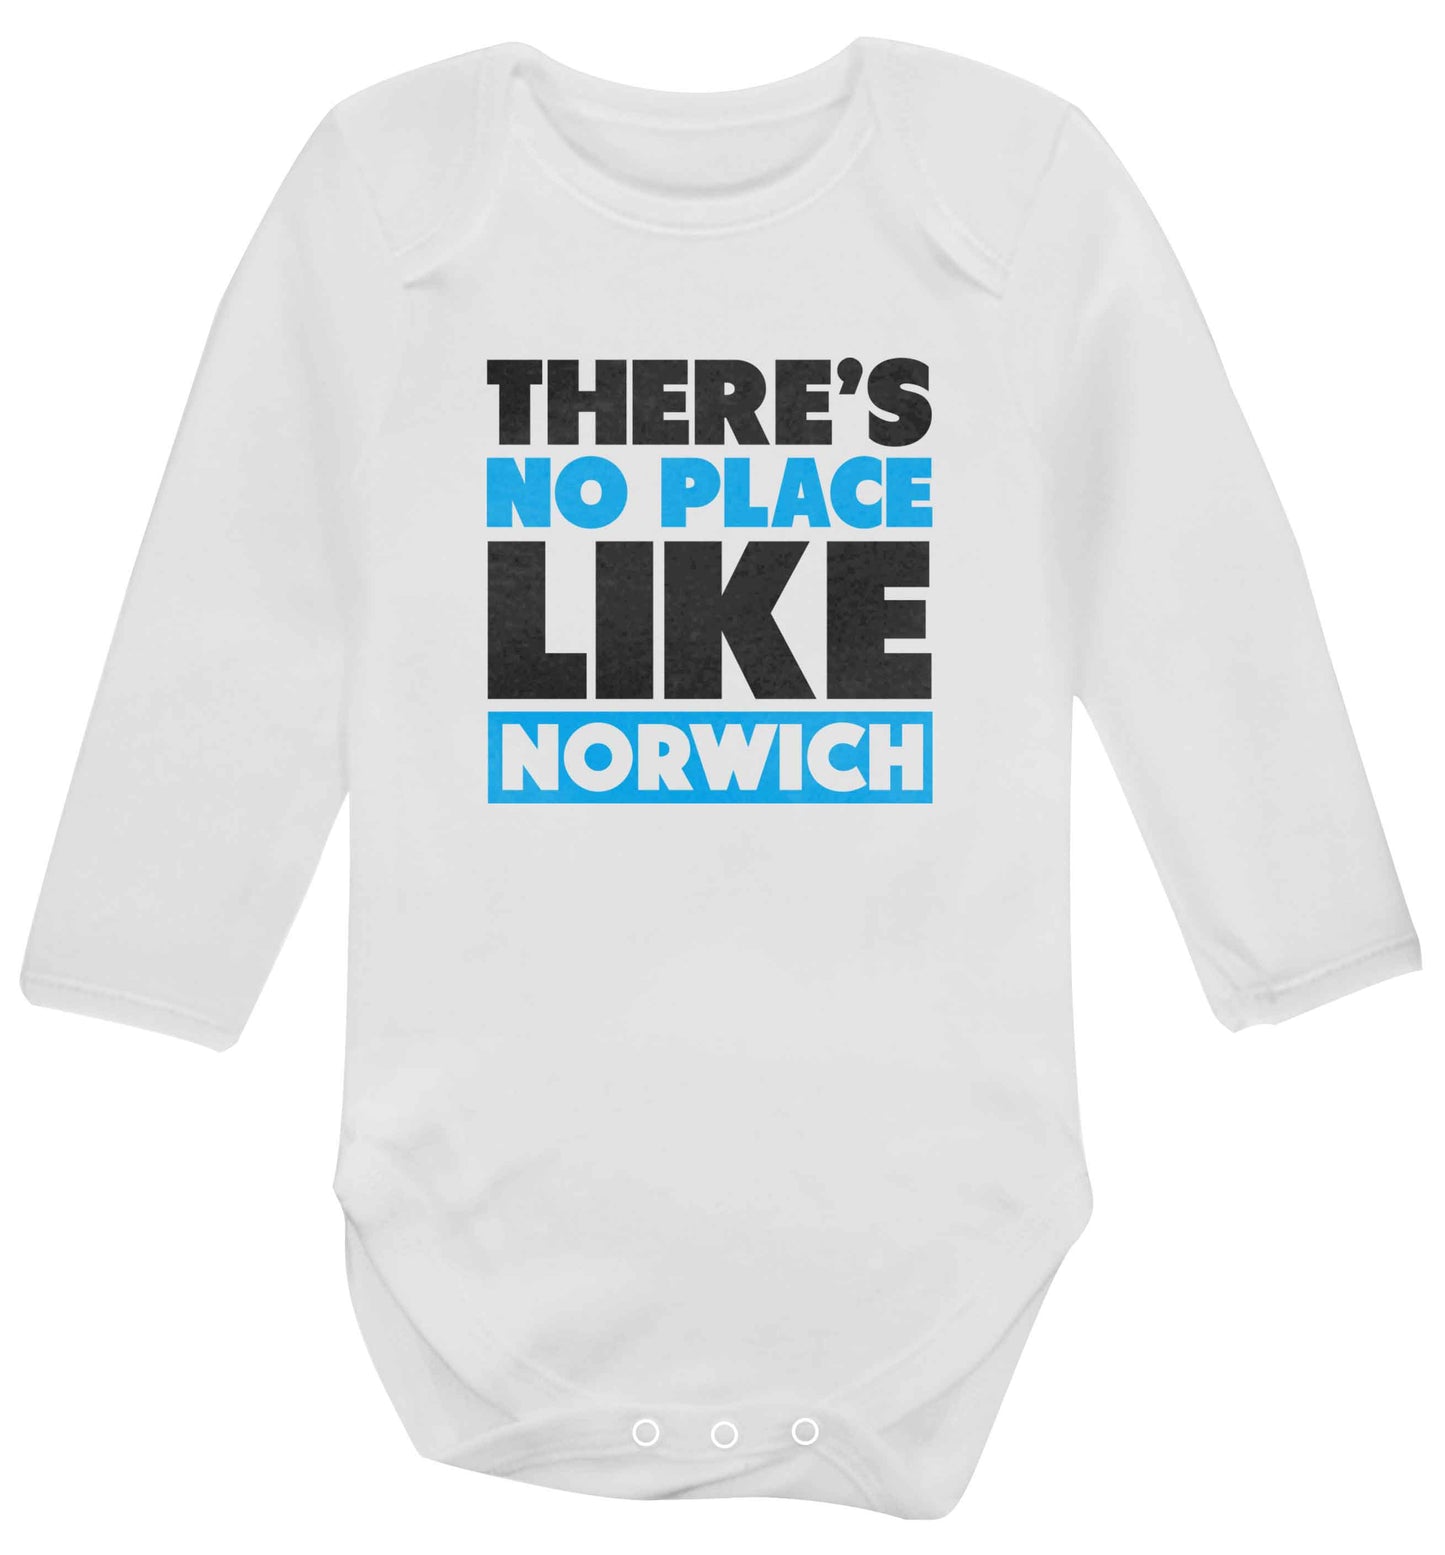 There's no place like Norwich baby vest long sleeved white 6-12 months